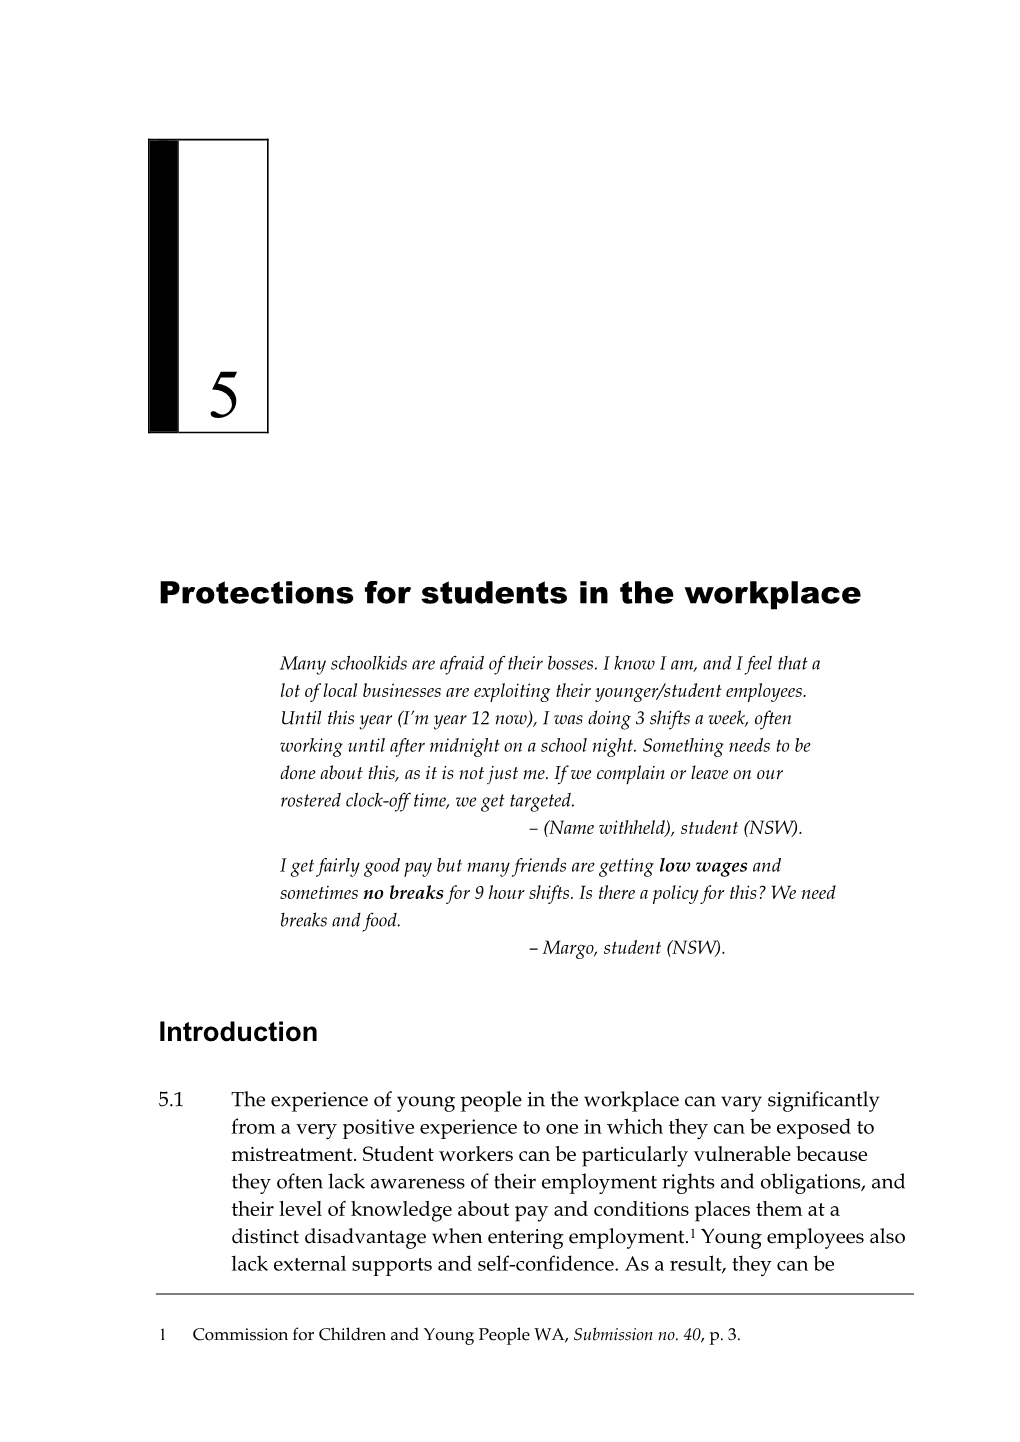 Chapter 5: Protections for Students in the Workplace